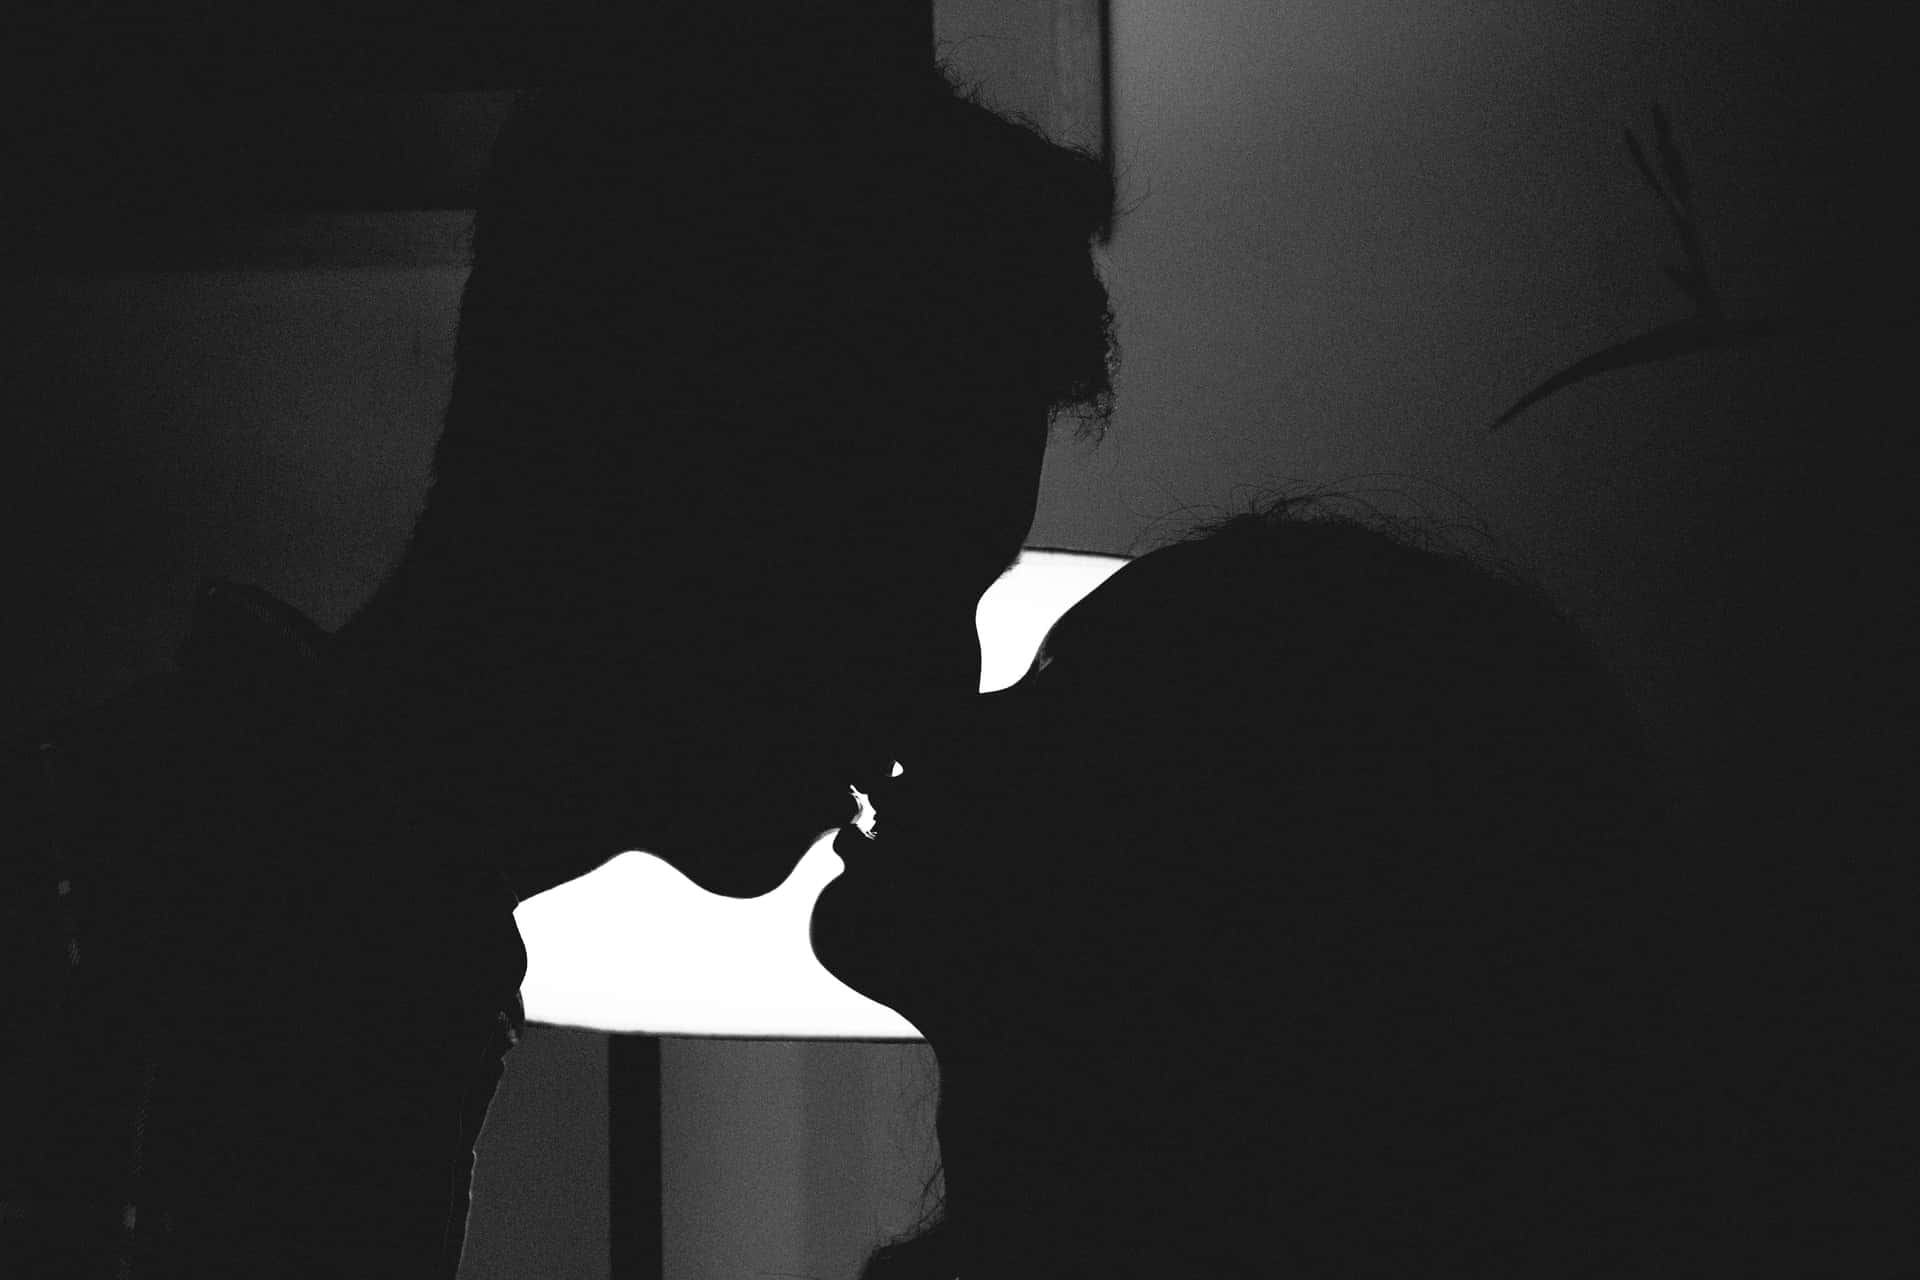 bobbie noble recommends couples kissing in the dark pic